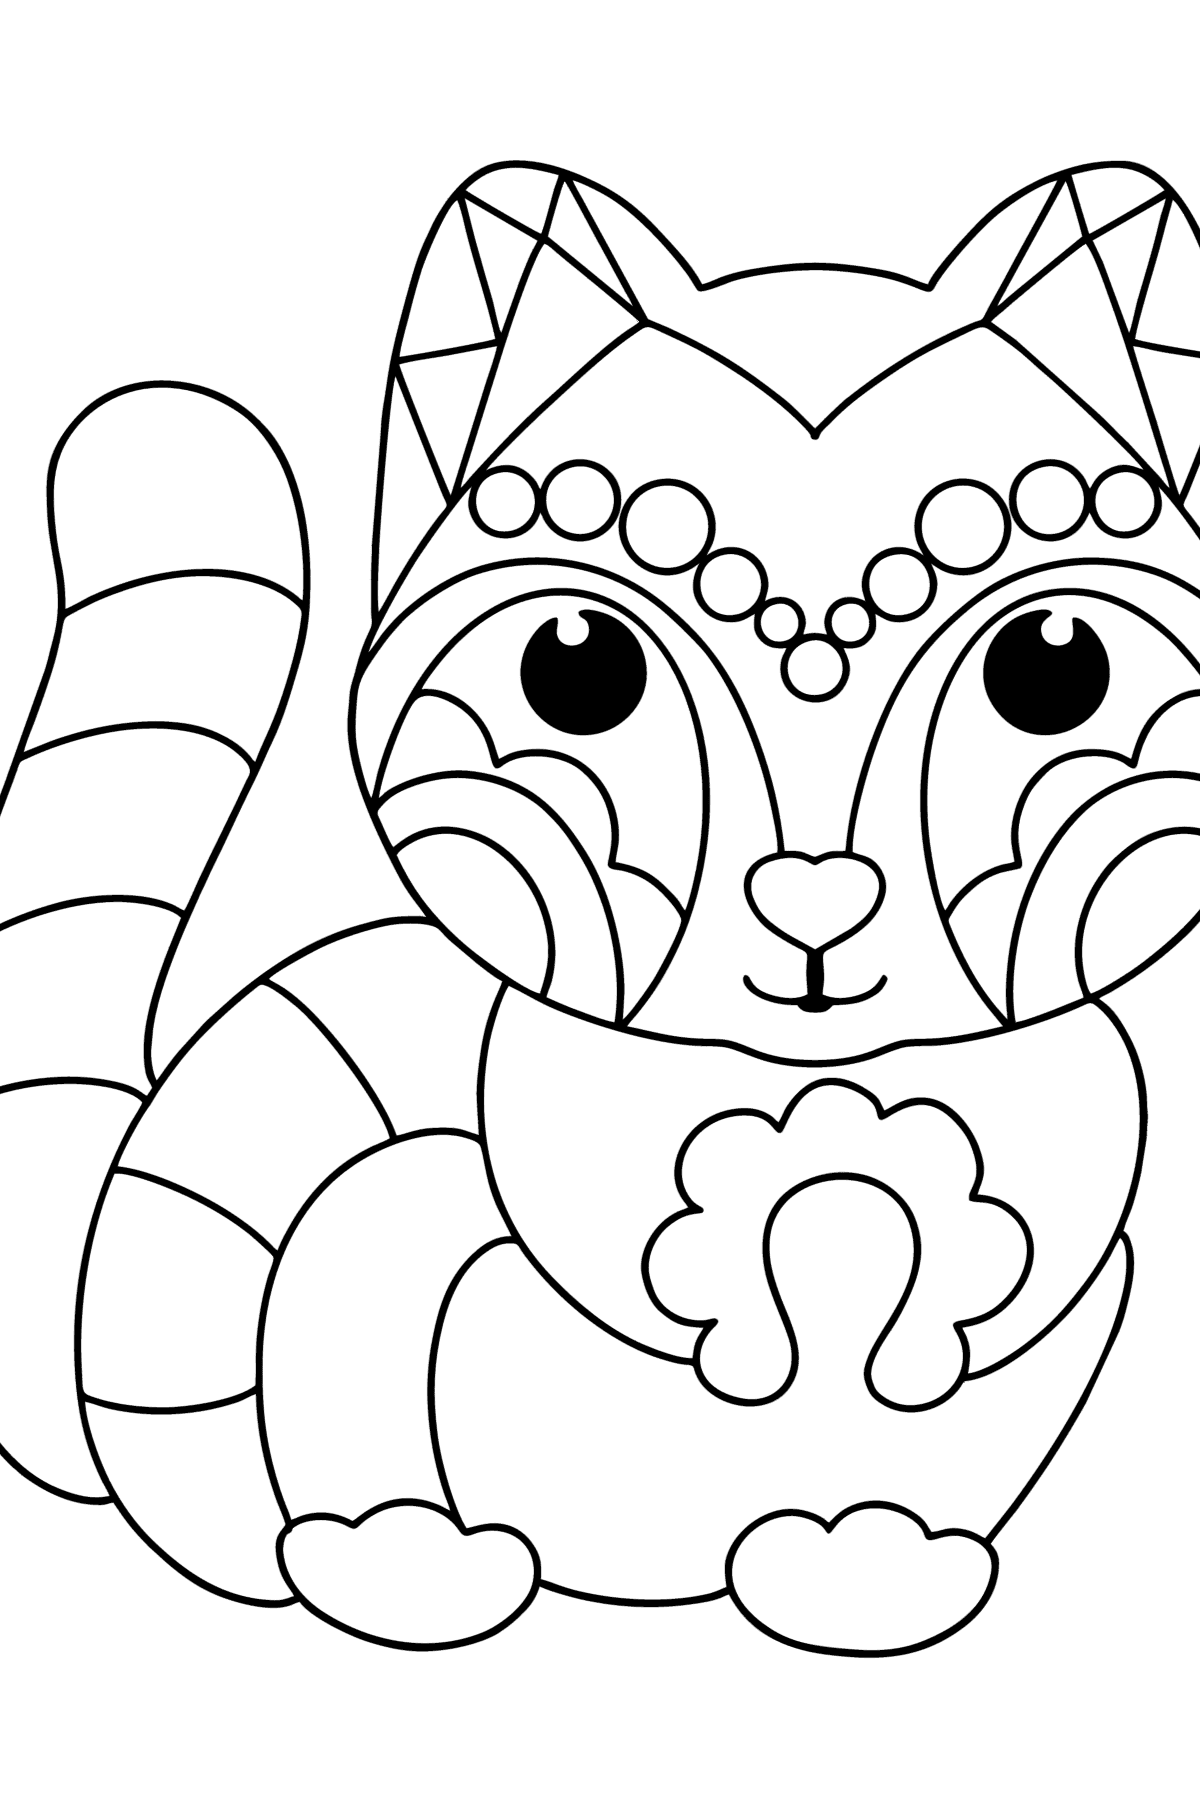 Coloring page Anti stress animals - raccoon - Coloring Pages for Kids